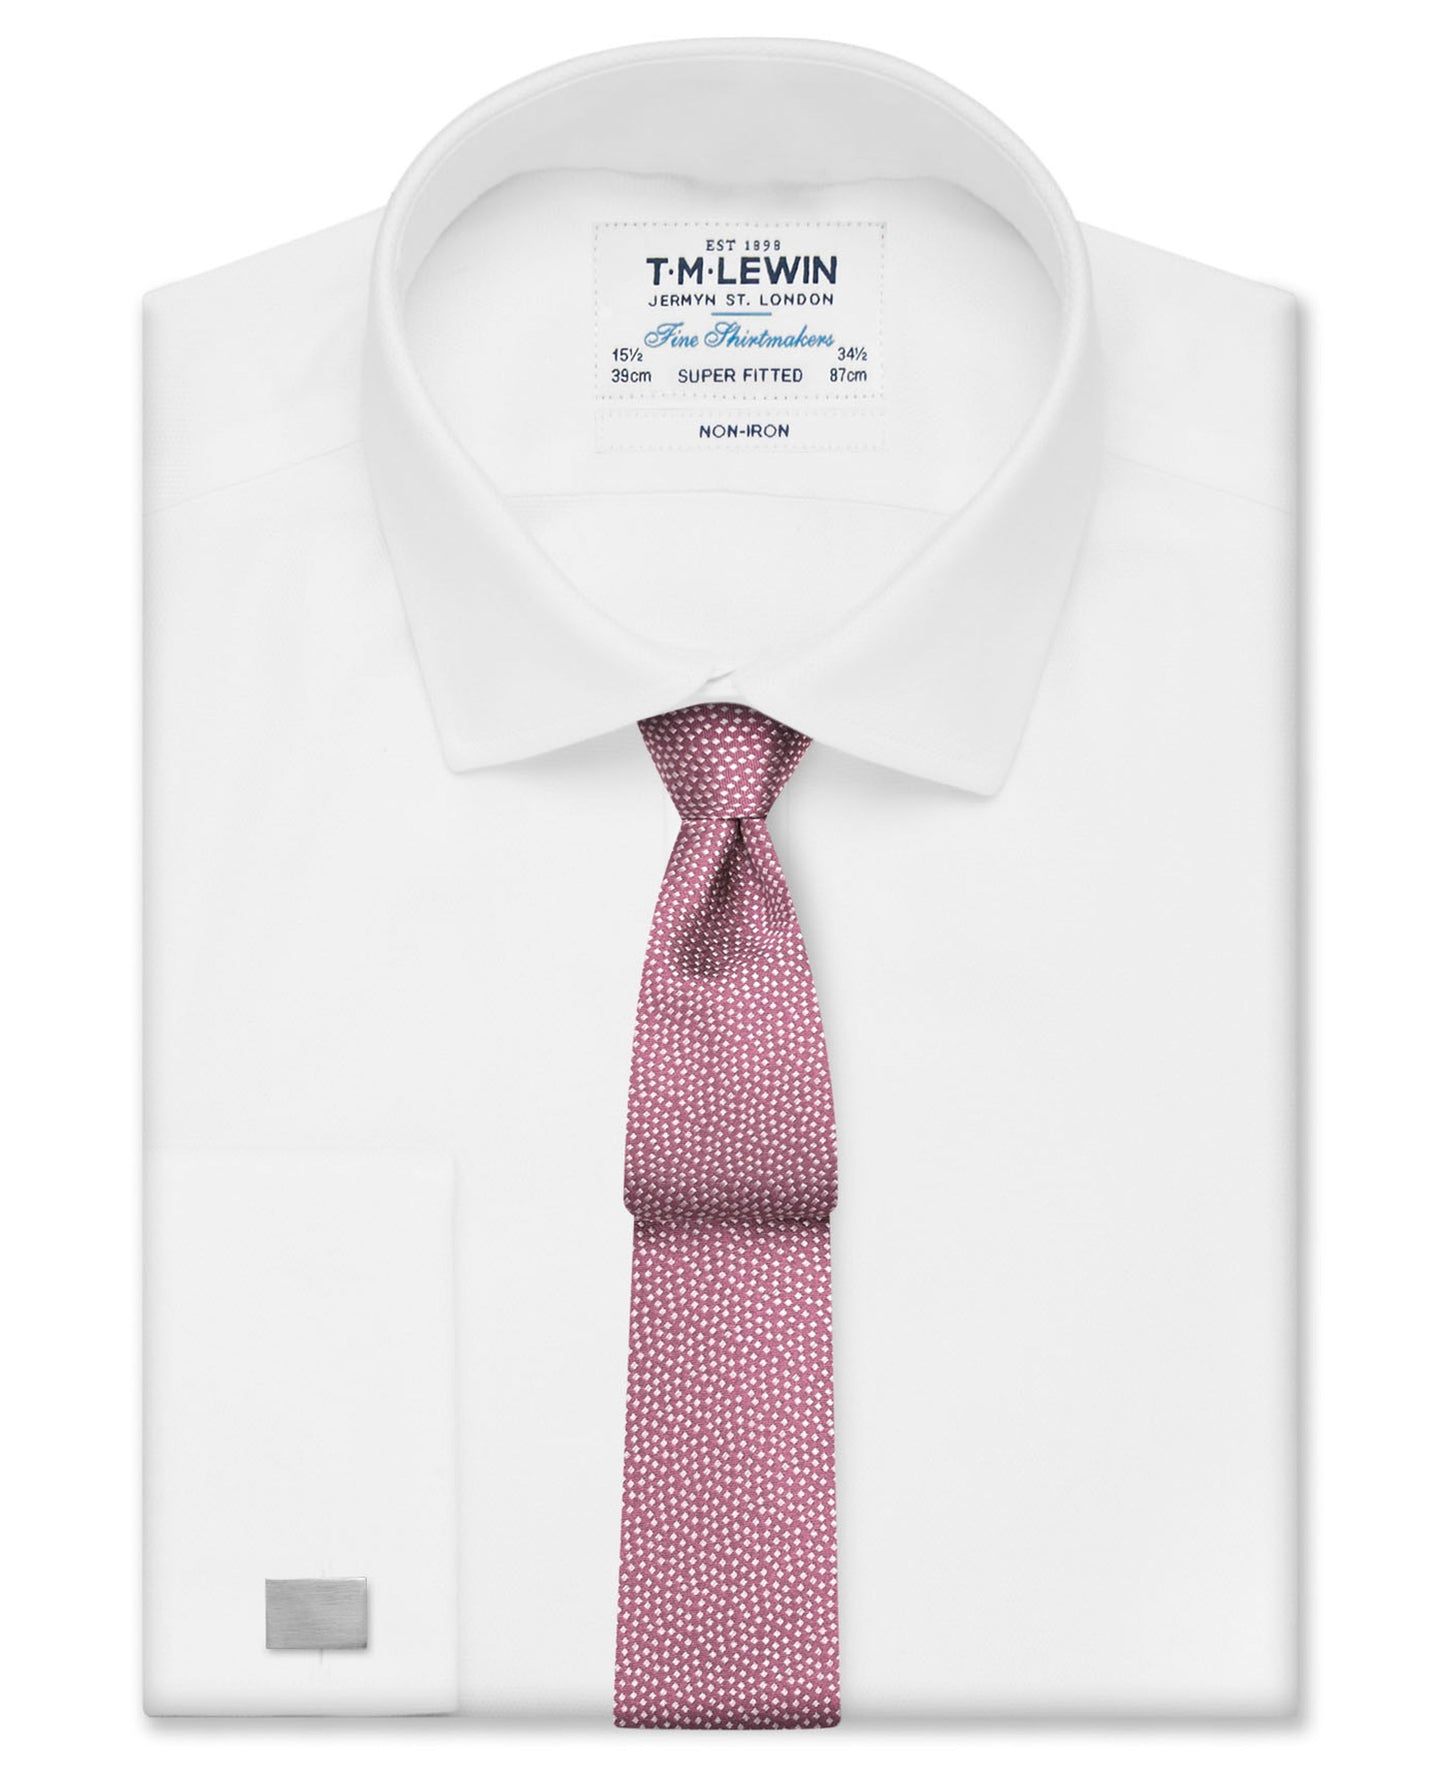 Image 2 of Non-Iron White Oxford Super Fitted Double Cuff Classic Collar Shirt